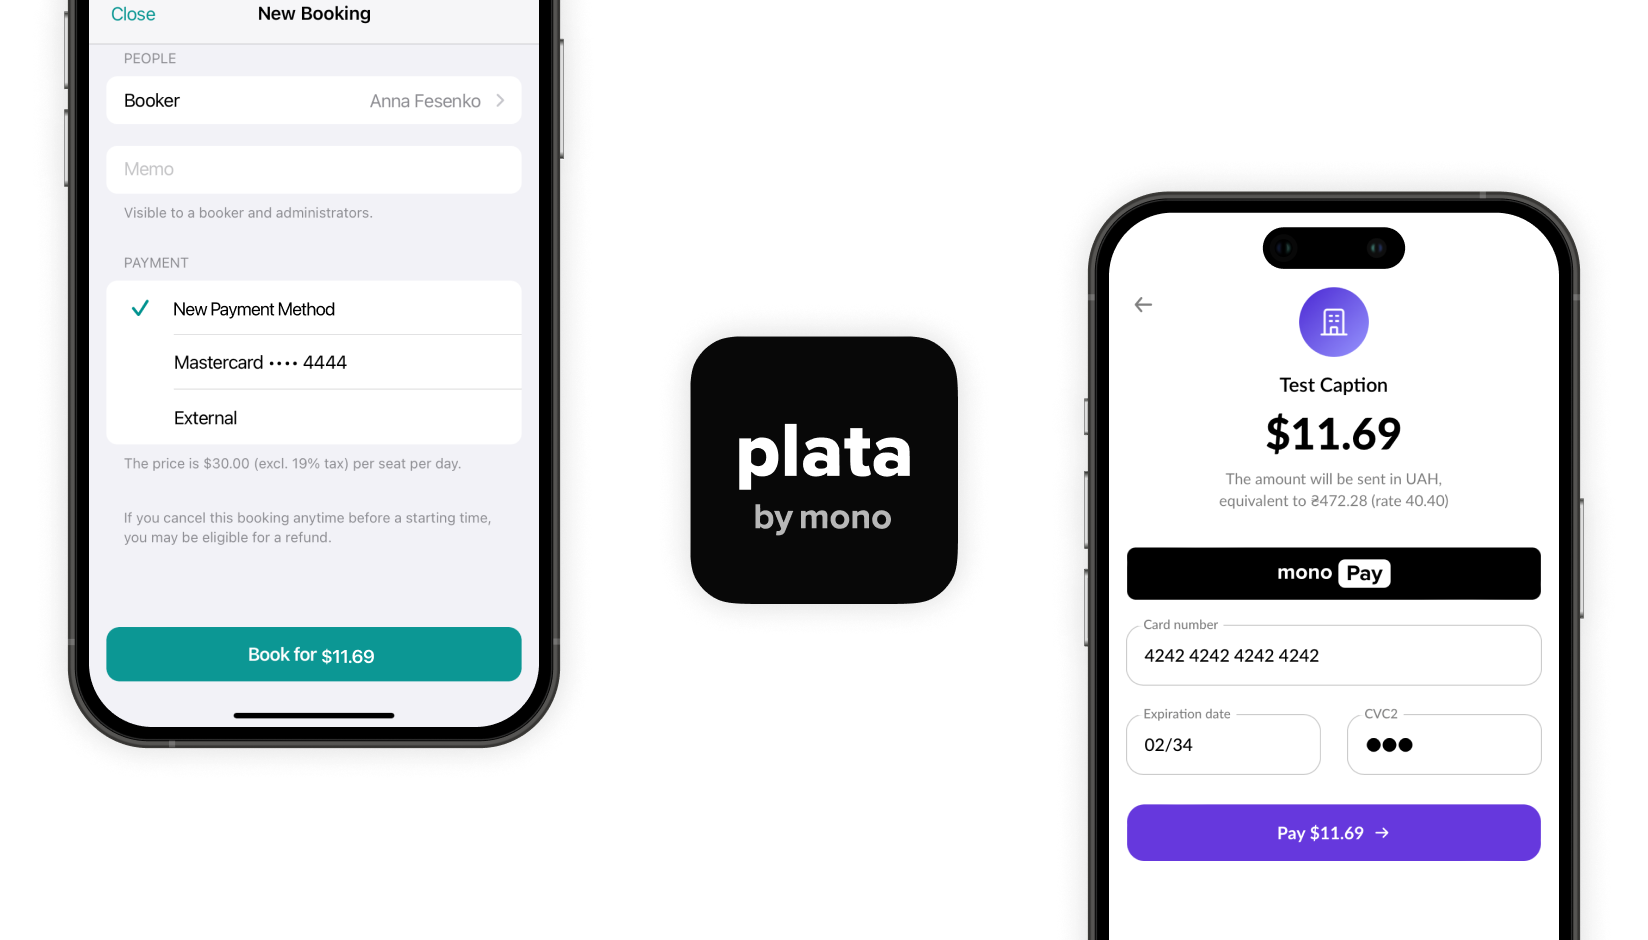 Introducing plata by mono Payment Gateway